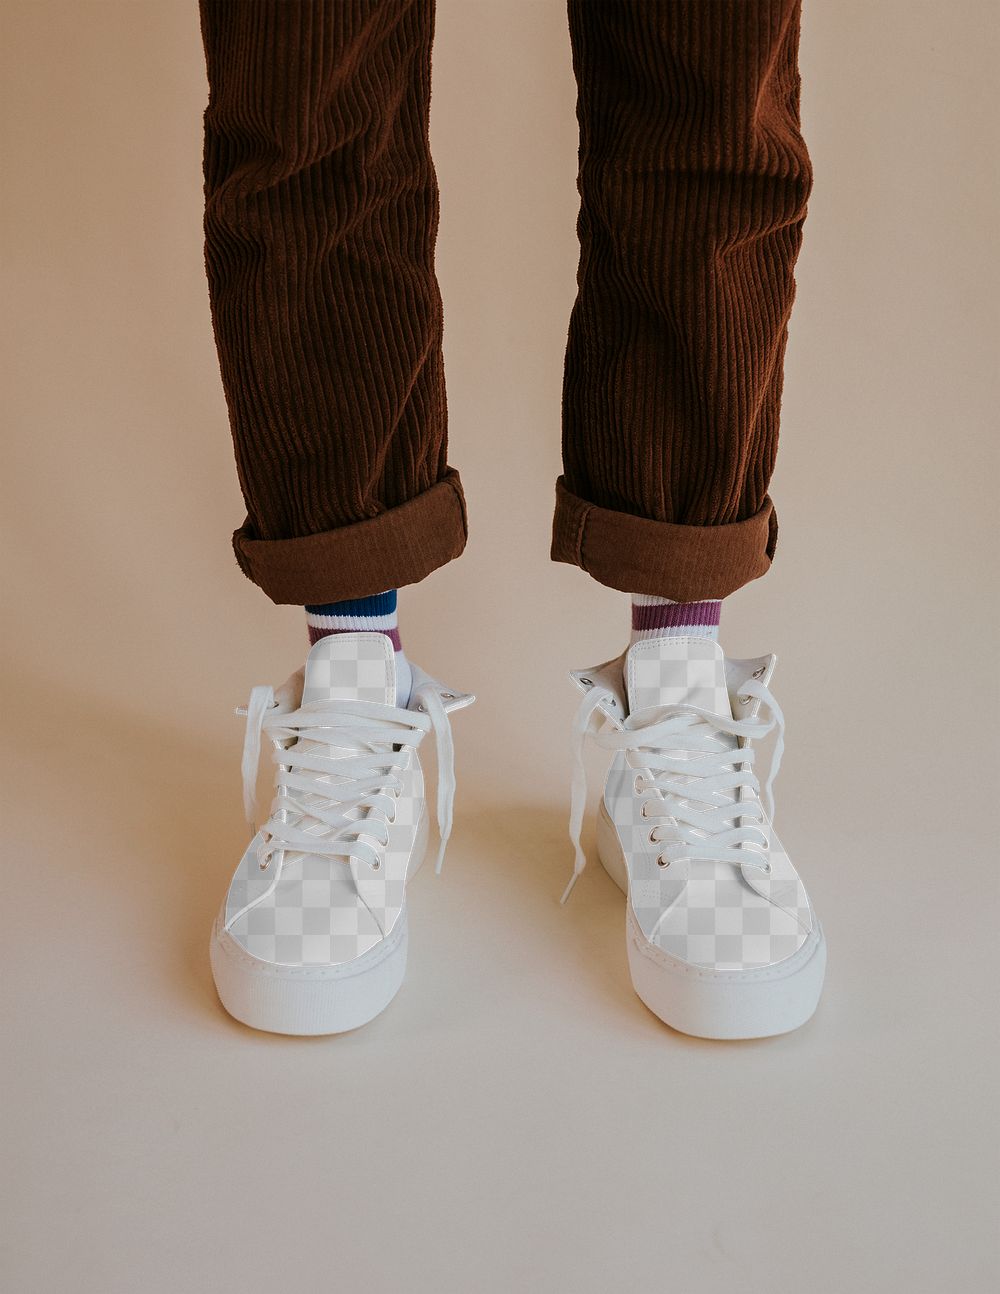 Png sneakers mockup with untied laces on model